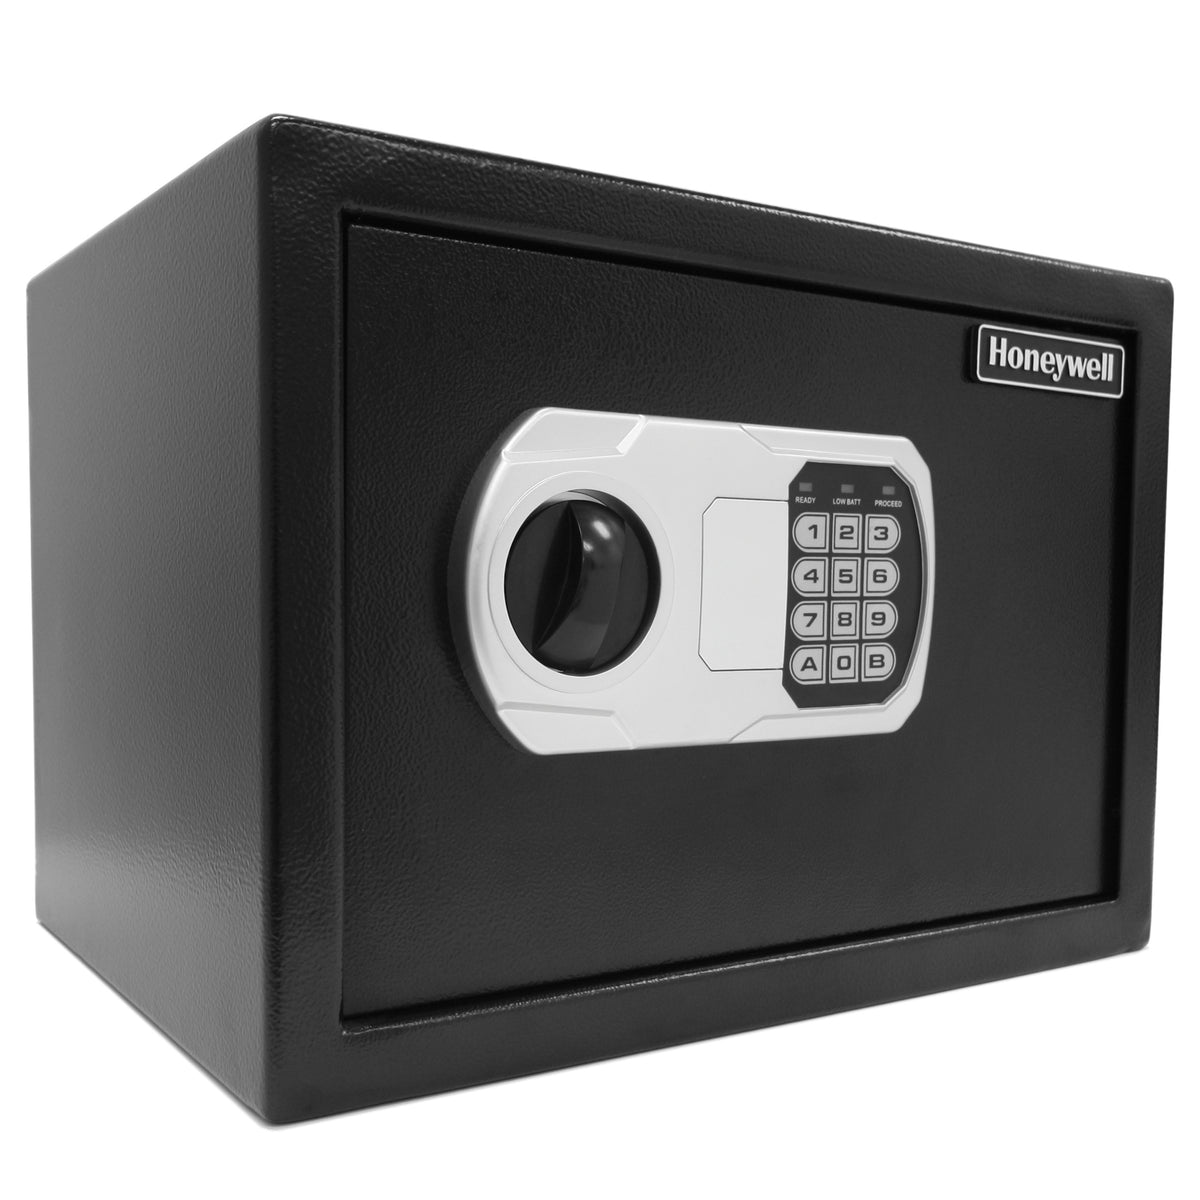 Honeywell 5110 Small Steel Security Safe with Digital Lock Angled